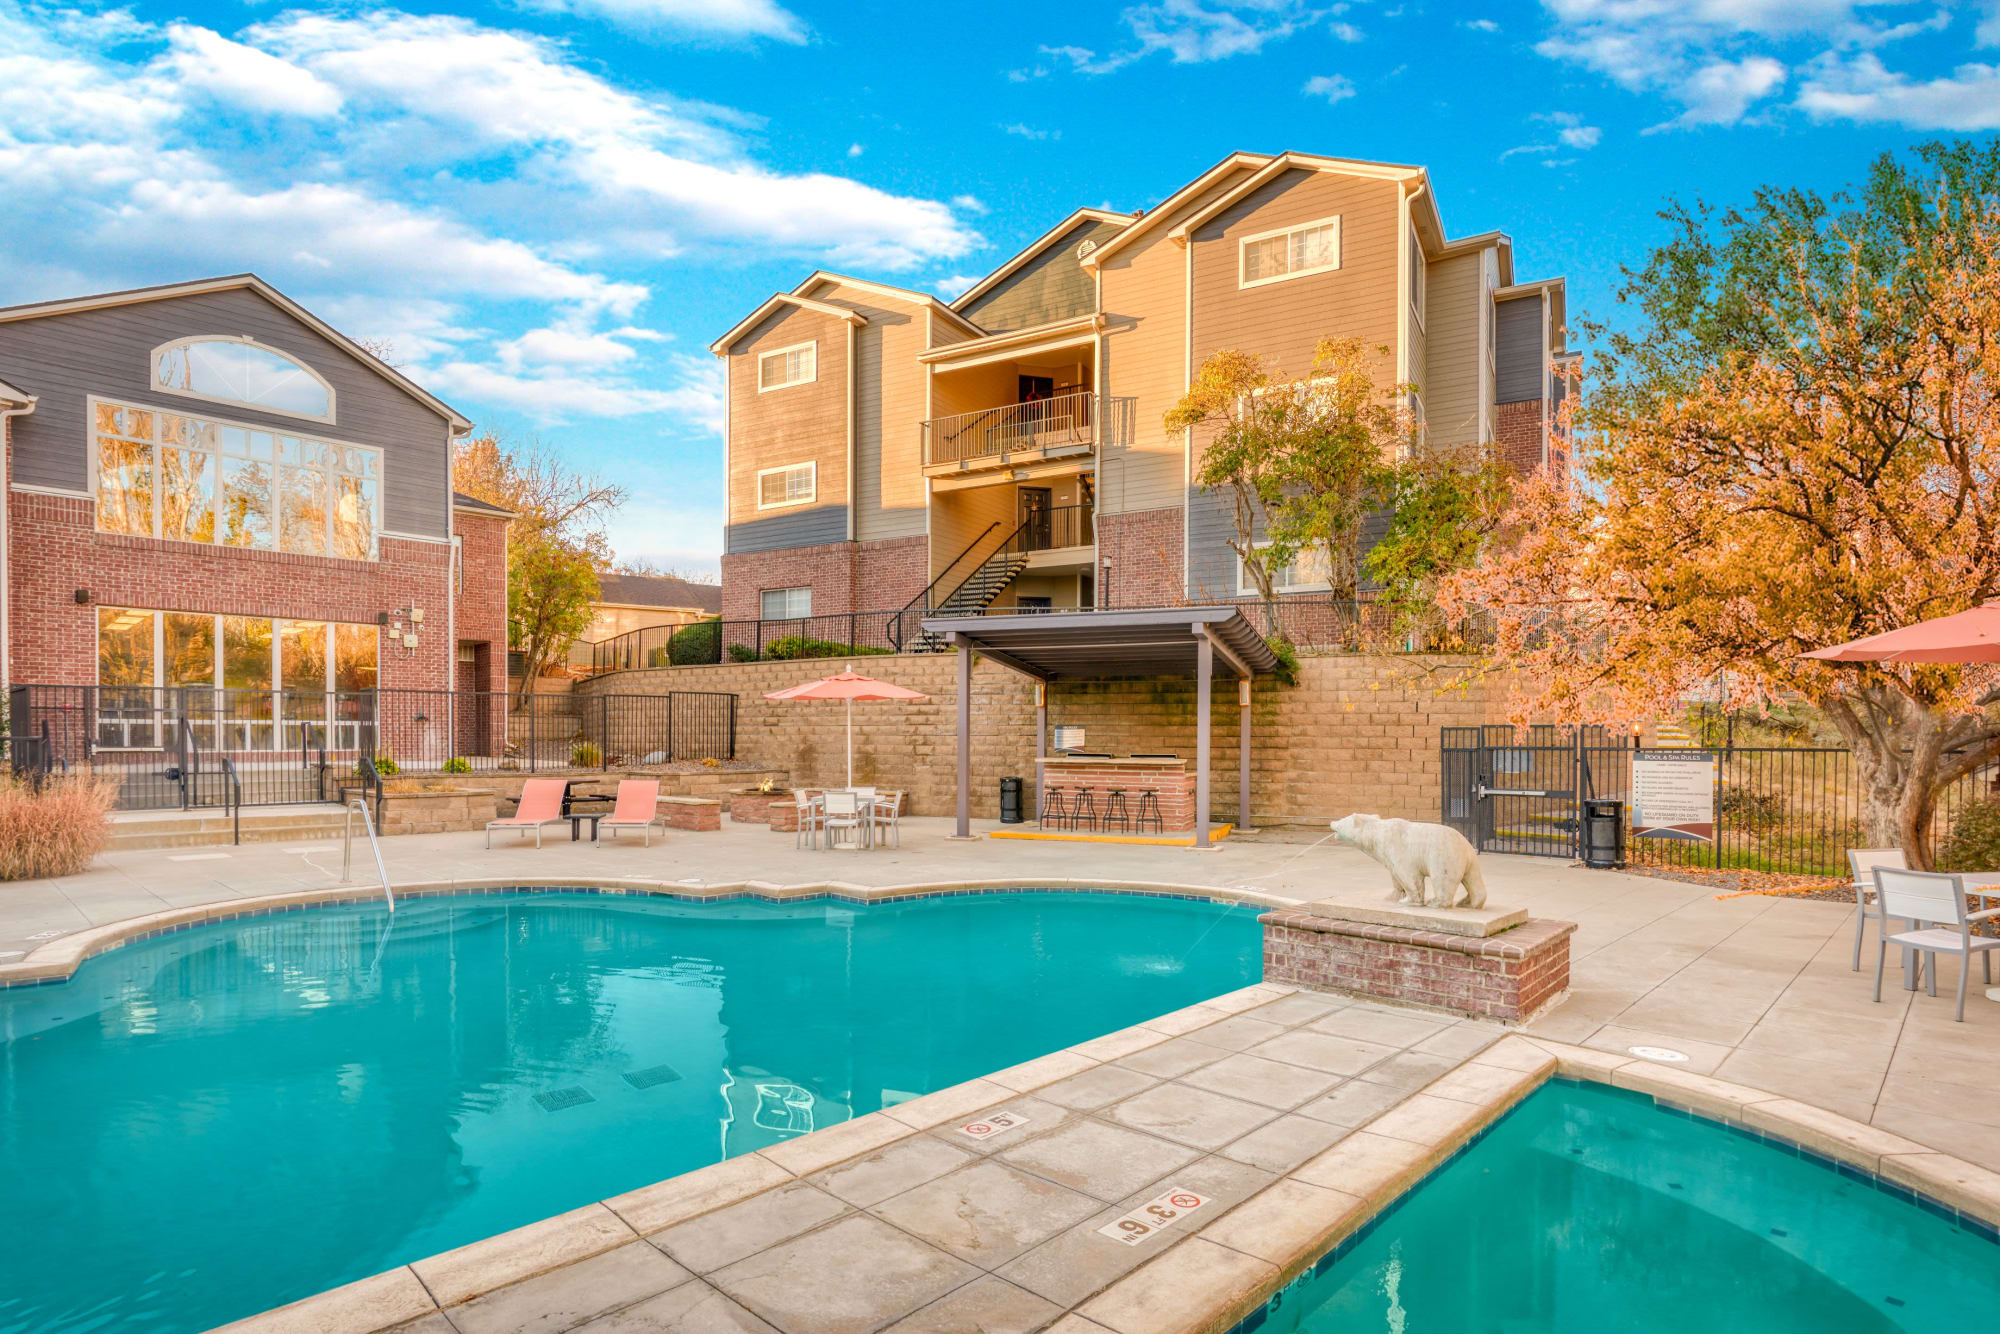 The spa and pool with lounge chairs, umbrellas, BBQ and corn hole at The Crossings at Bear Creek Apartments in Lakewood, Colorado